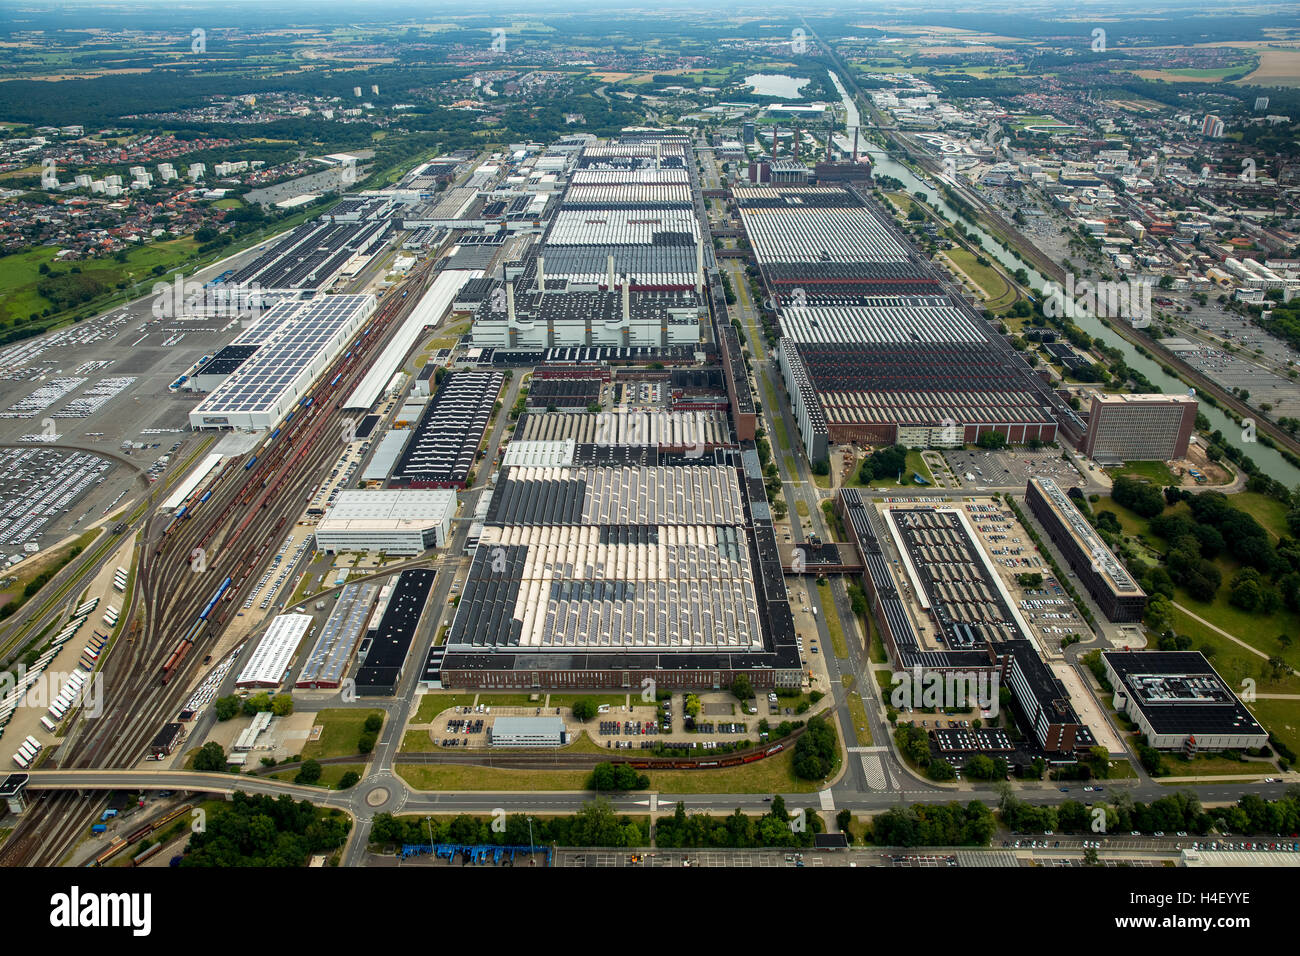 Aerial view, Volkswagen factory in Wolfsburg, Lower Saxony, Germany Stock Photo